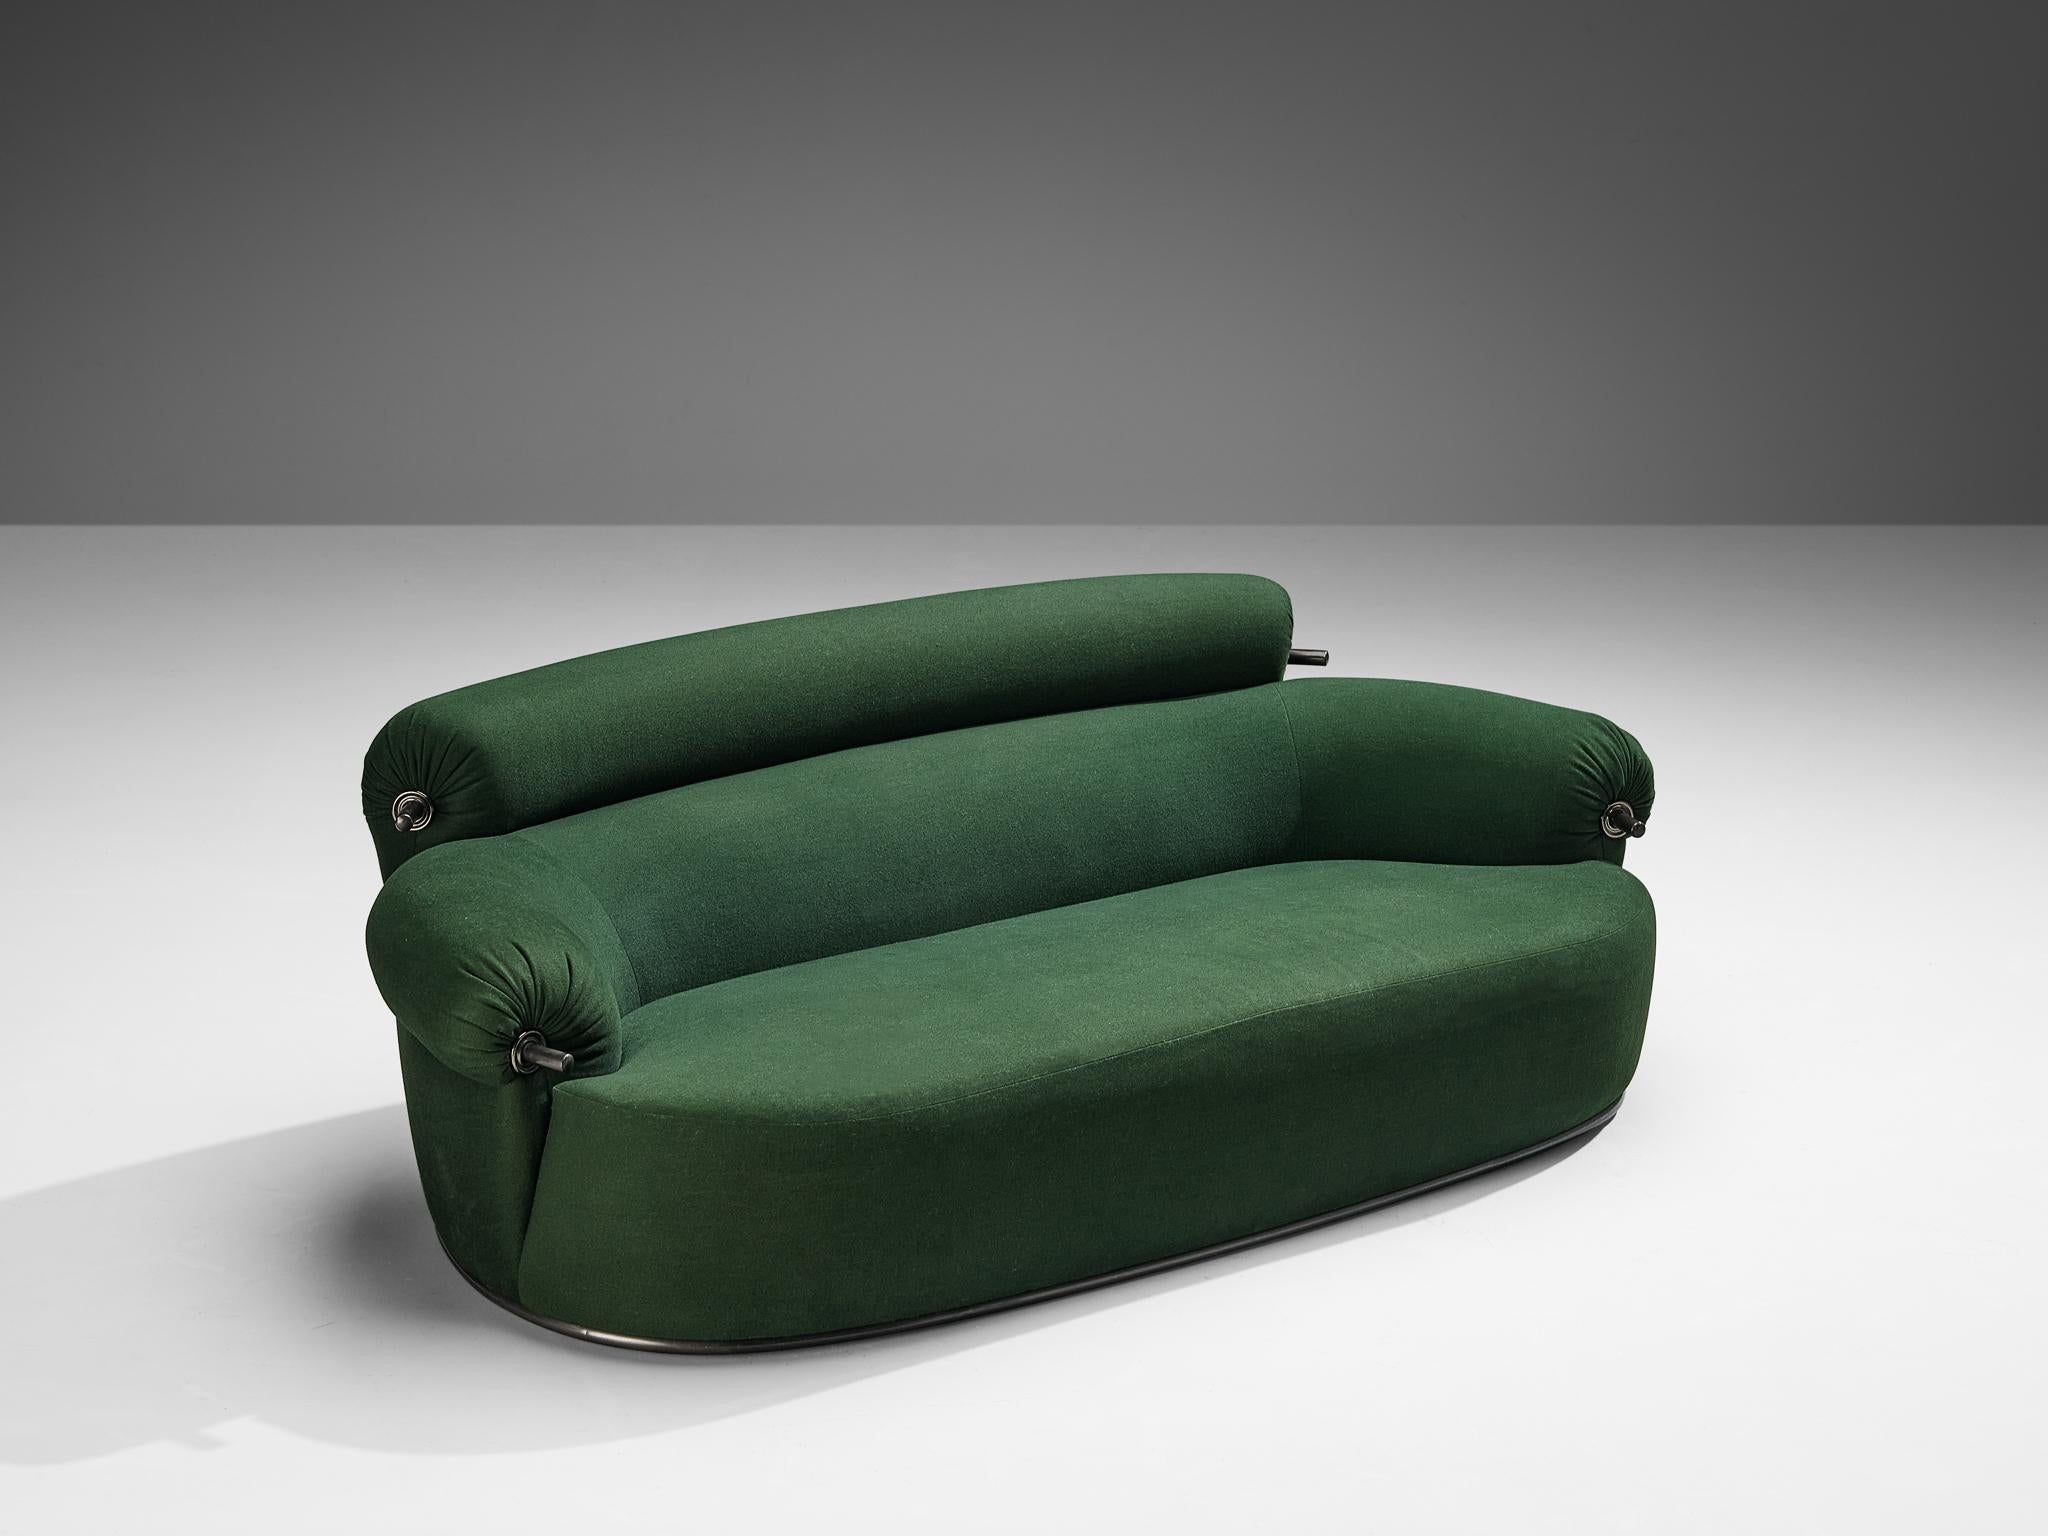 Luigi Caccia Dominioni for Azucena, sofa, model ‘P20B Toro’, fabric, metal, Italy, 1979

This sofa model 'P20B Toro' is designed by Luigi Caccio Dominioni in Milan and produced by Azucena. The ‘Toro’ sofa owns its name to several elements, such as